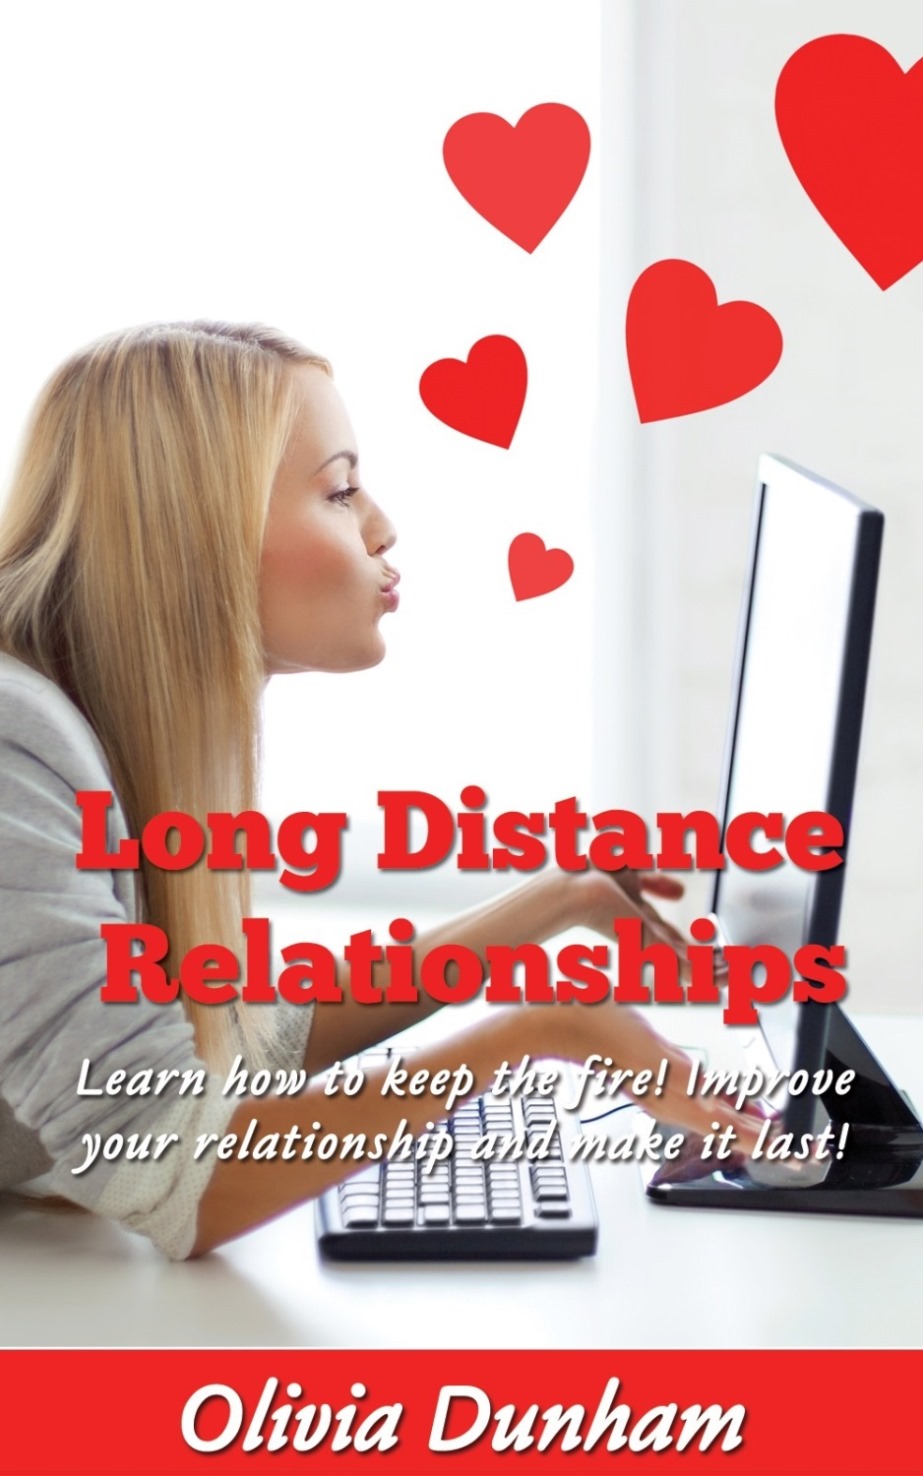 FREE: Long Distance Relationships: Learn how to keep the fire! Improve your relationship and make it last! by Olivia Dunham